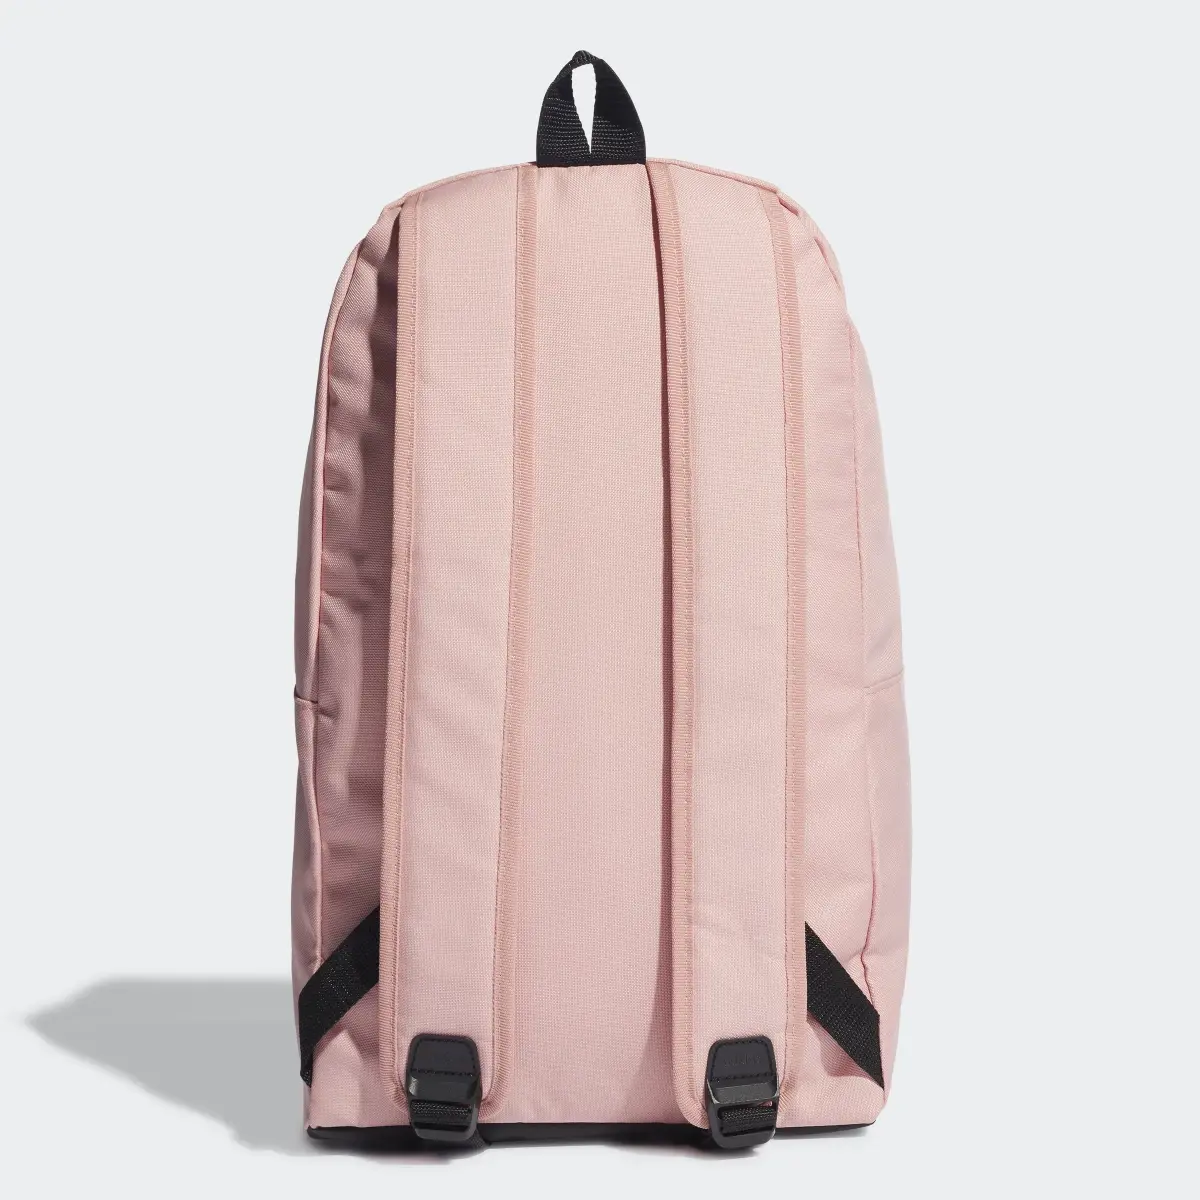 Adidas Linear Classic Daily Backpack. 3